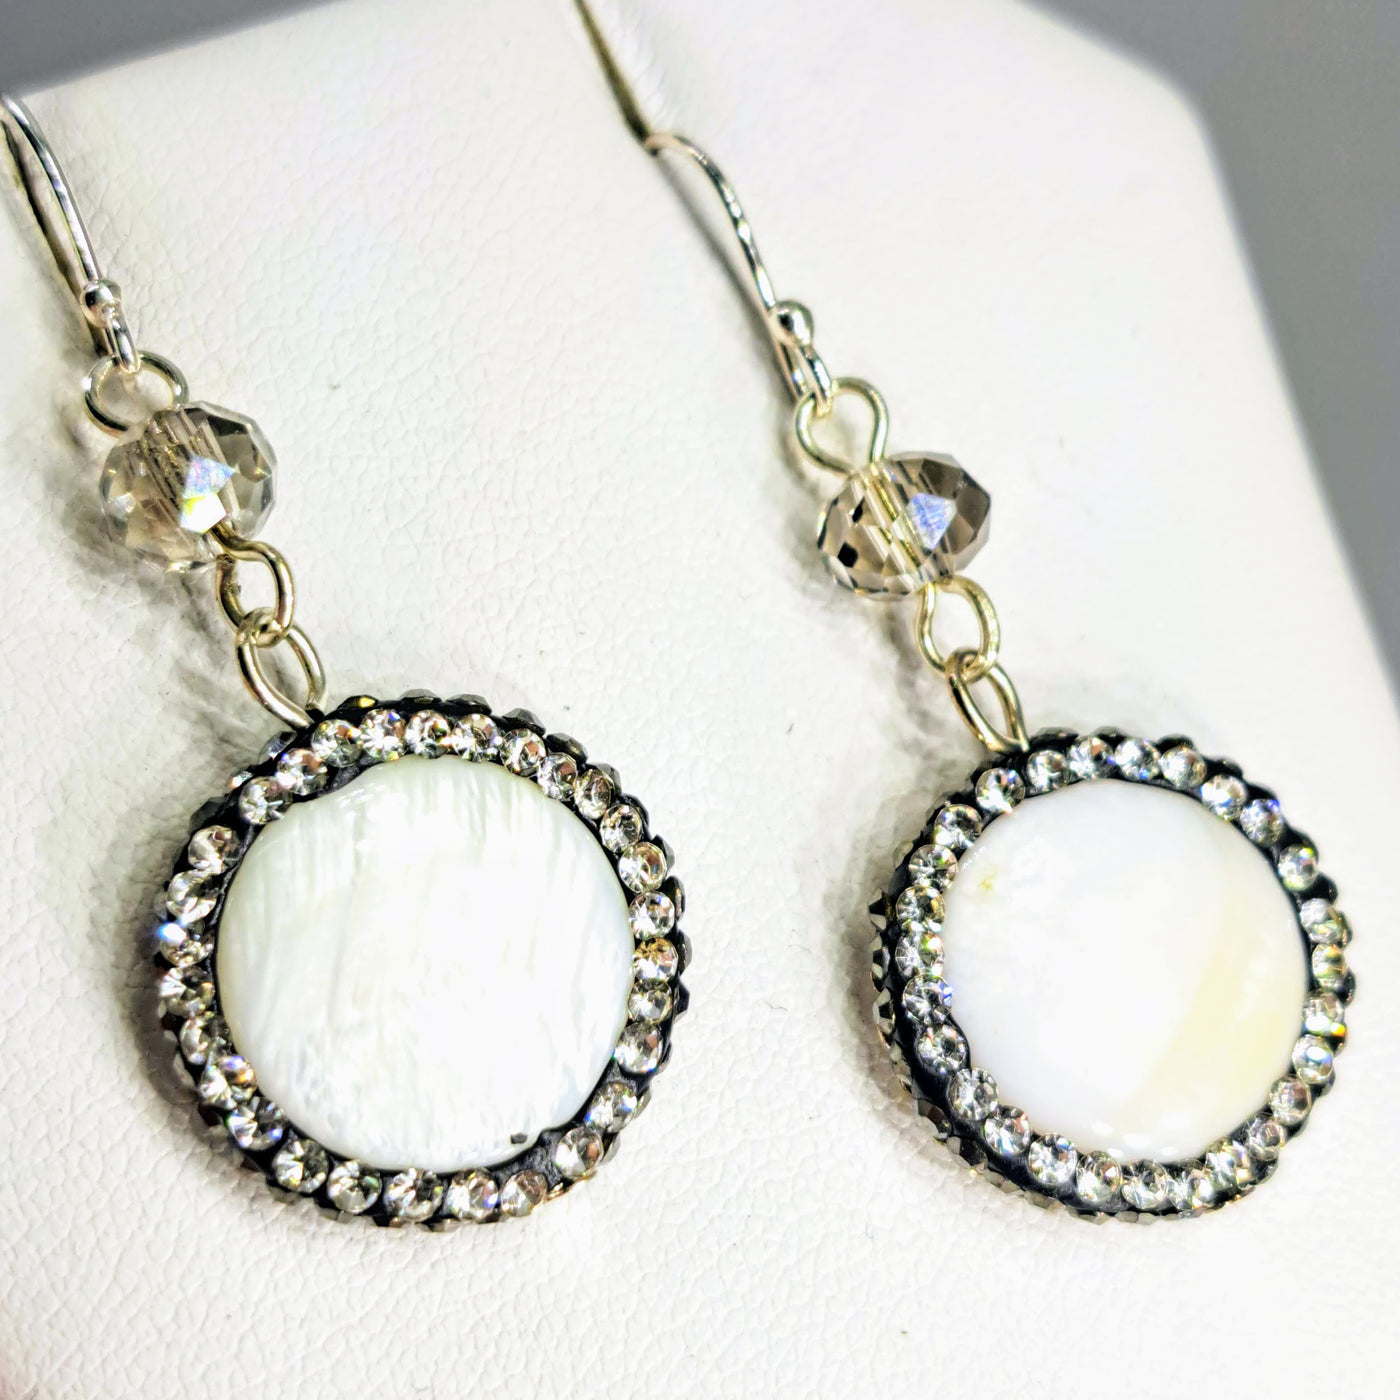 "Sparkle Basics" 1.5" to 2" Earrings - Mother Of Pearl, Turquenite, Crystal Or Onyx, with Pave' & Sterling